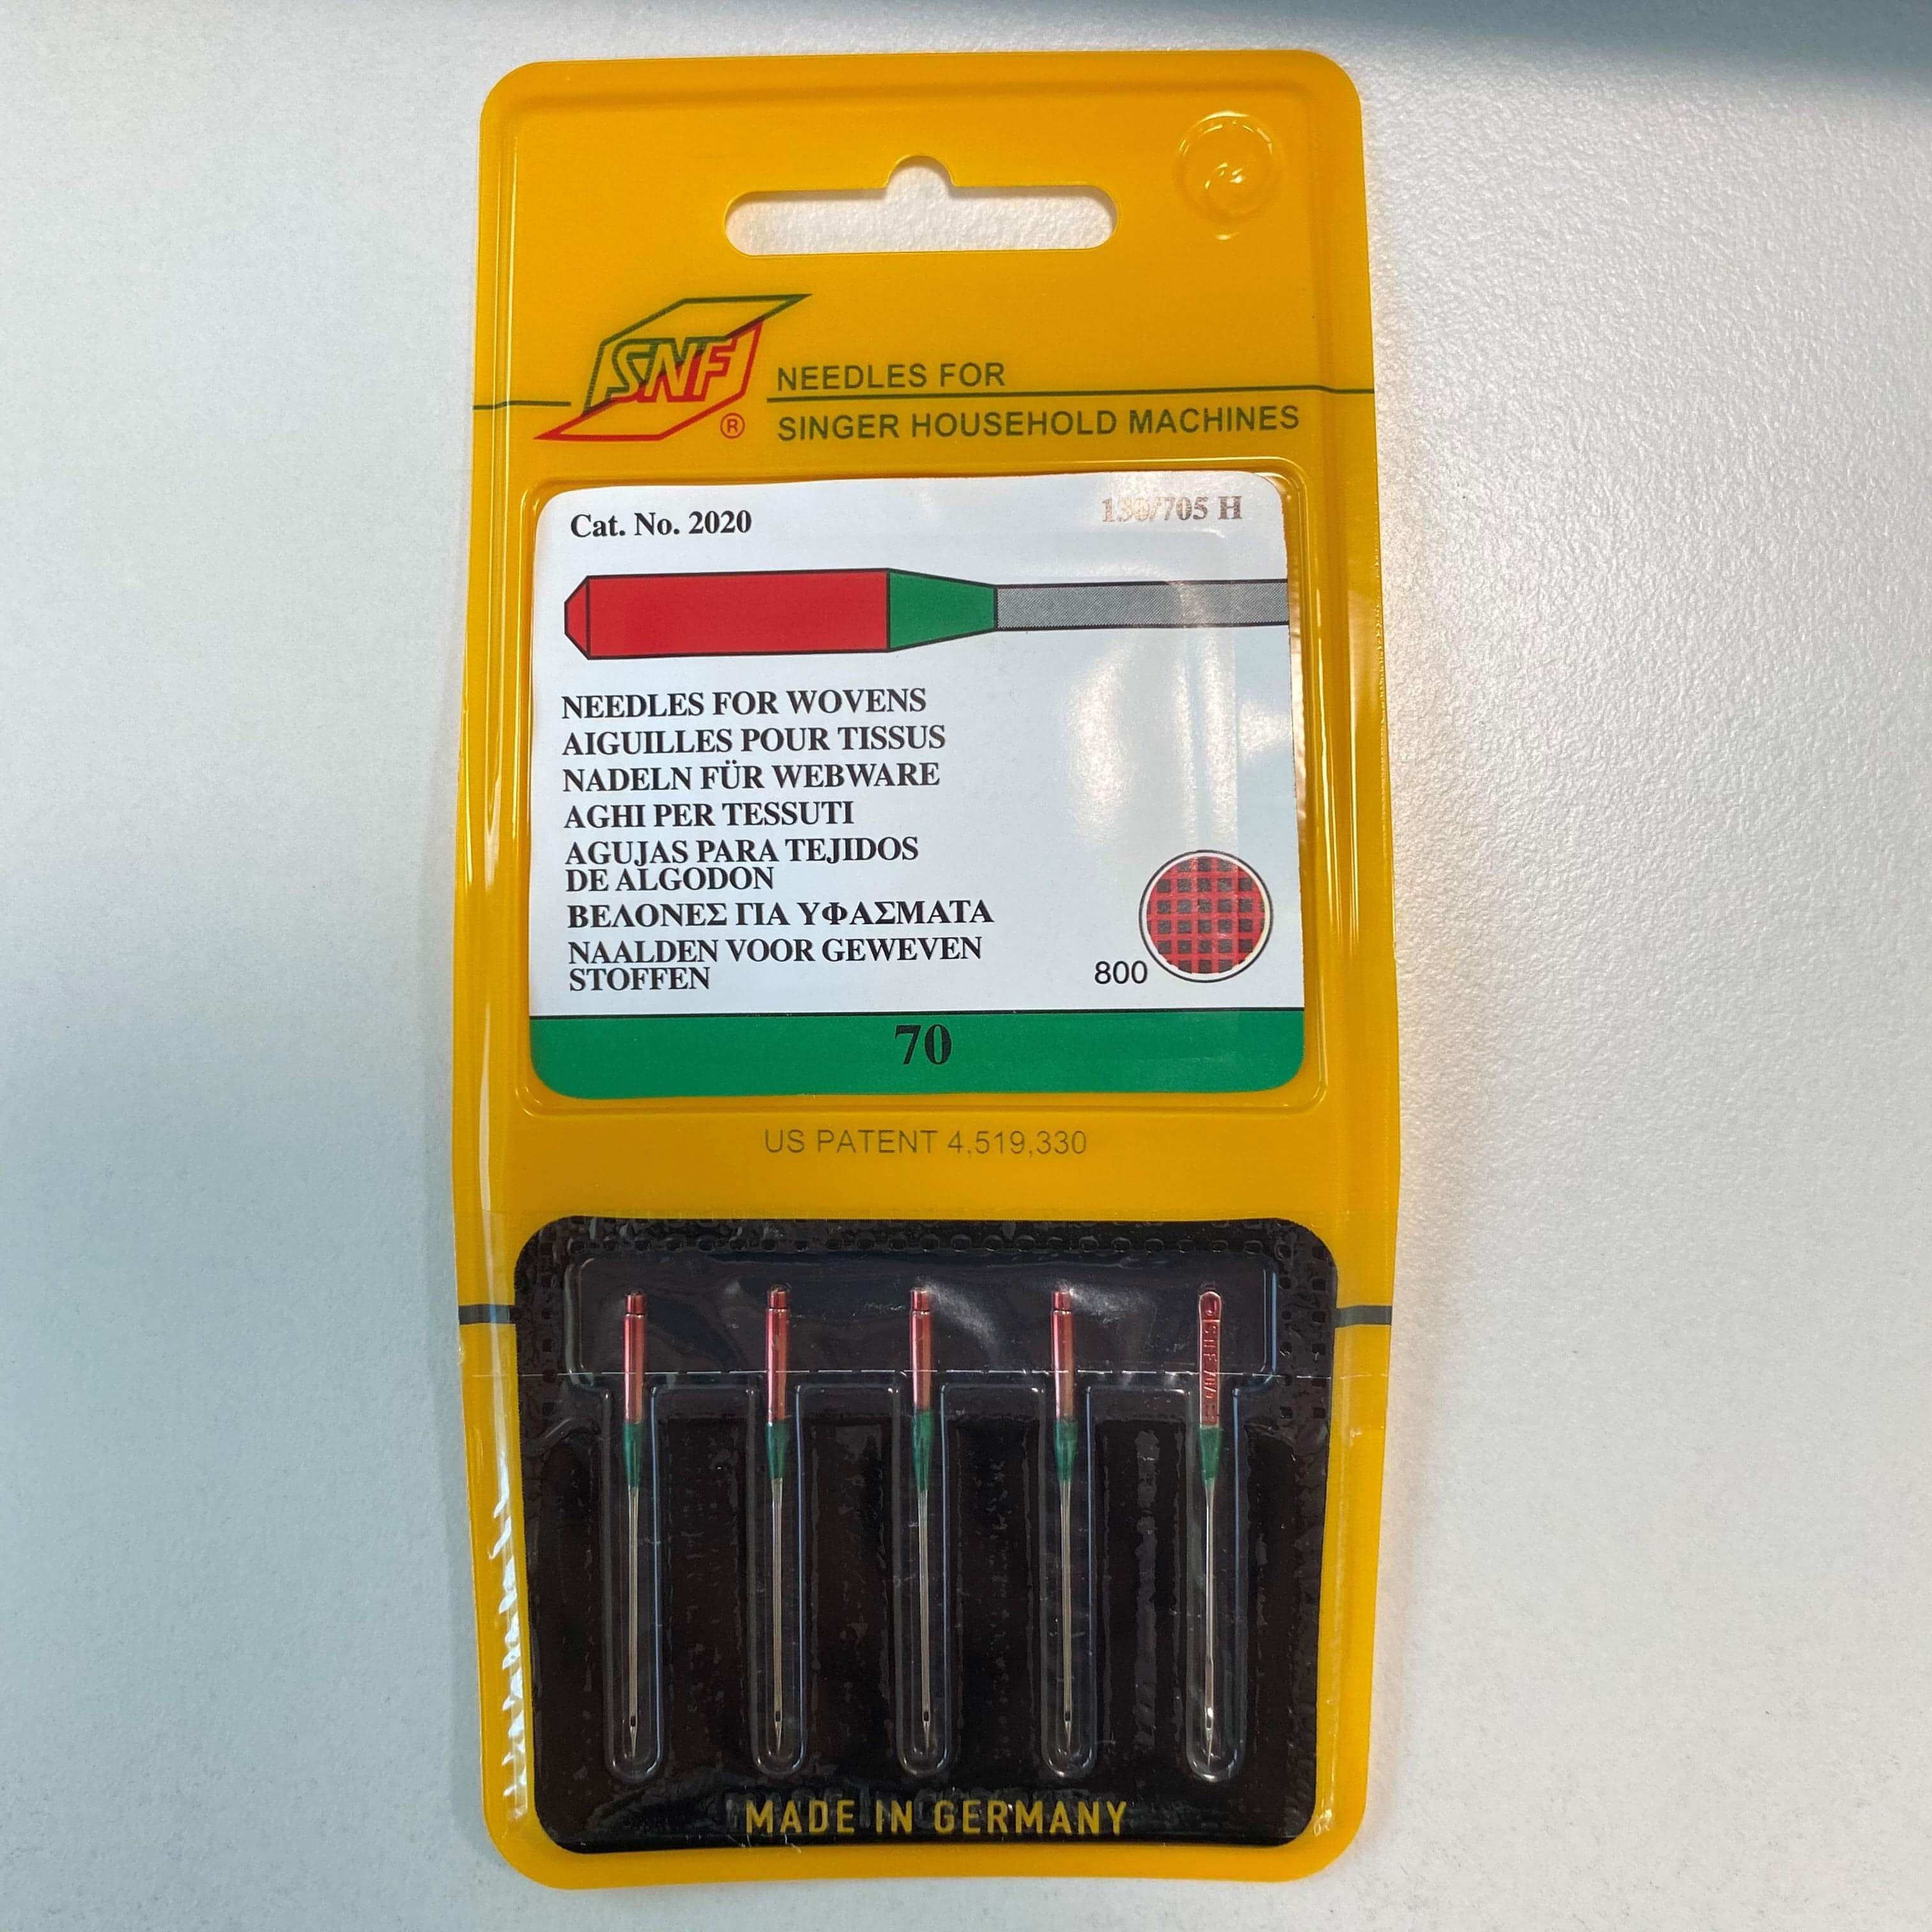 5 x 2020 Light weight size 70 needles for Singer machines (made in Germany)